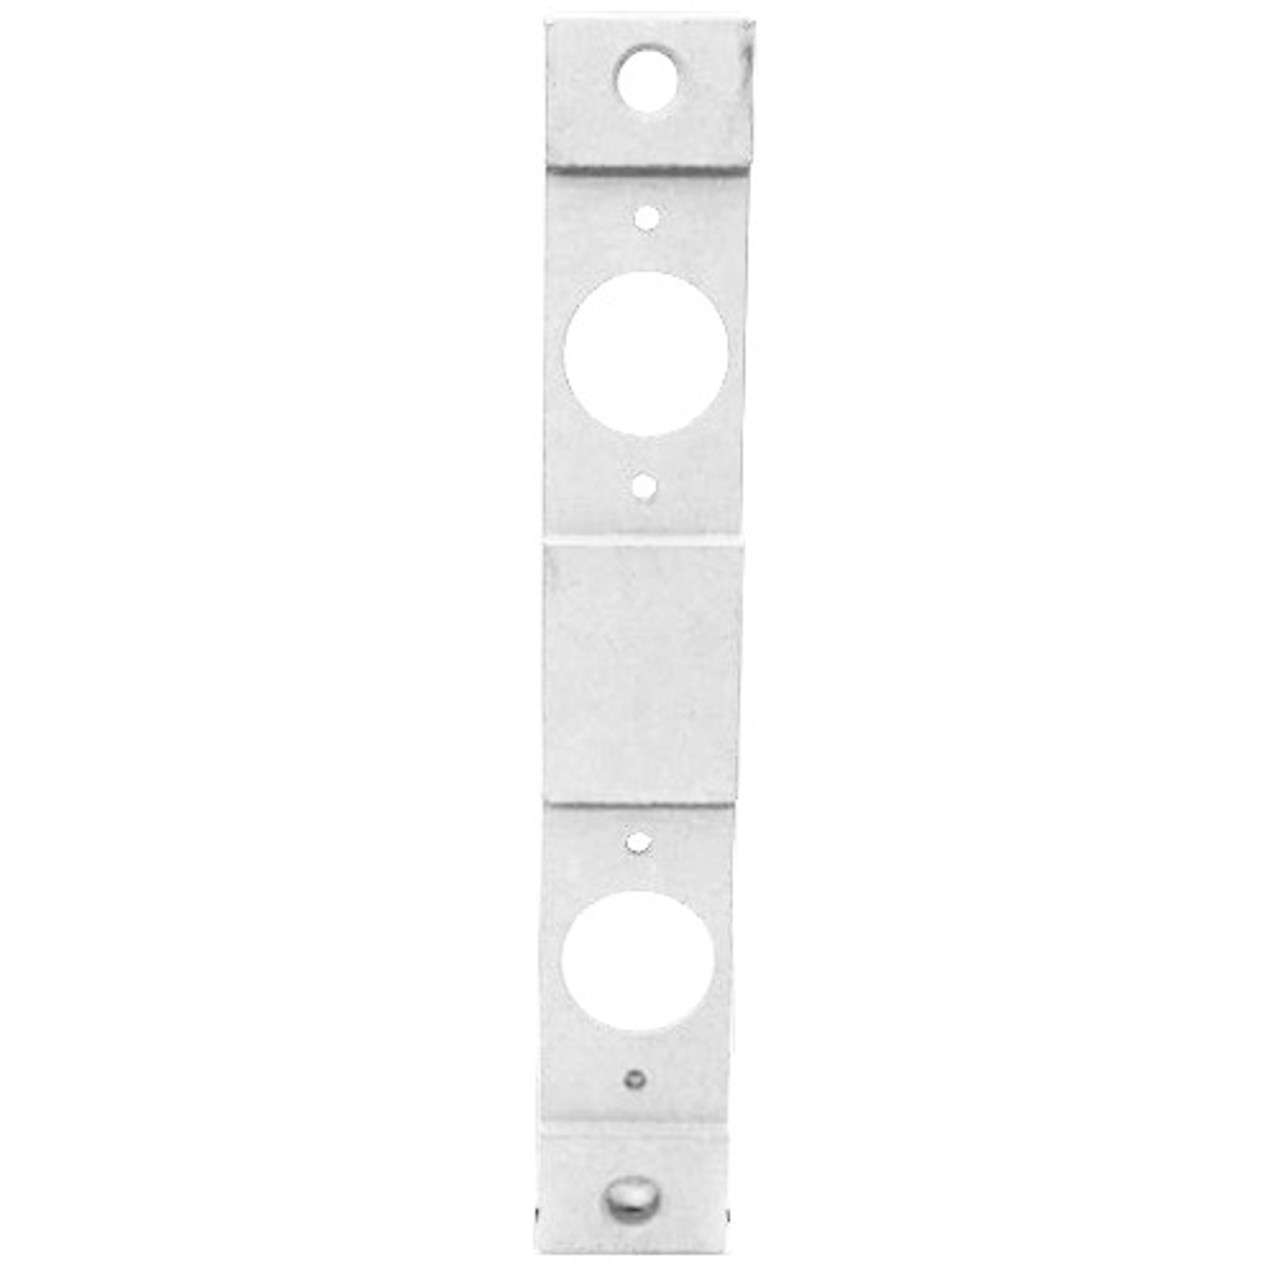 CV-8624-PC Don Jo Mortise Conversion Plate in Prime Coated Finish